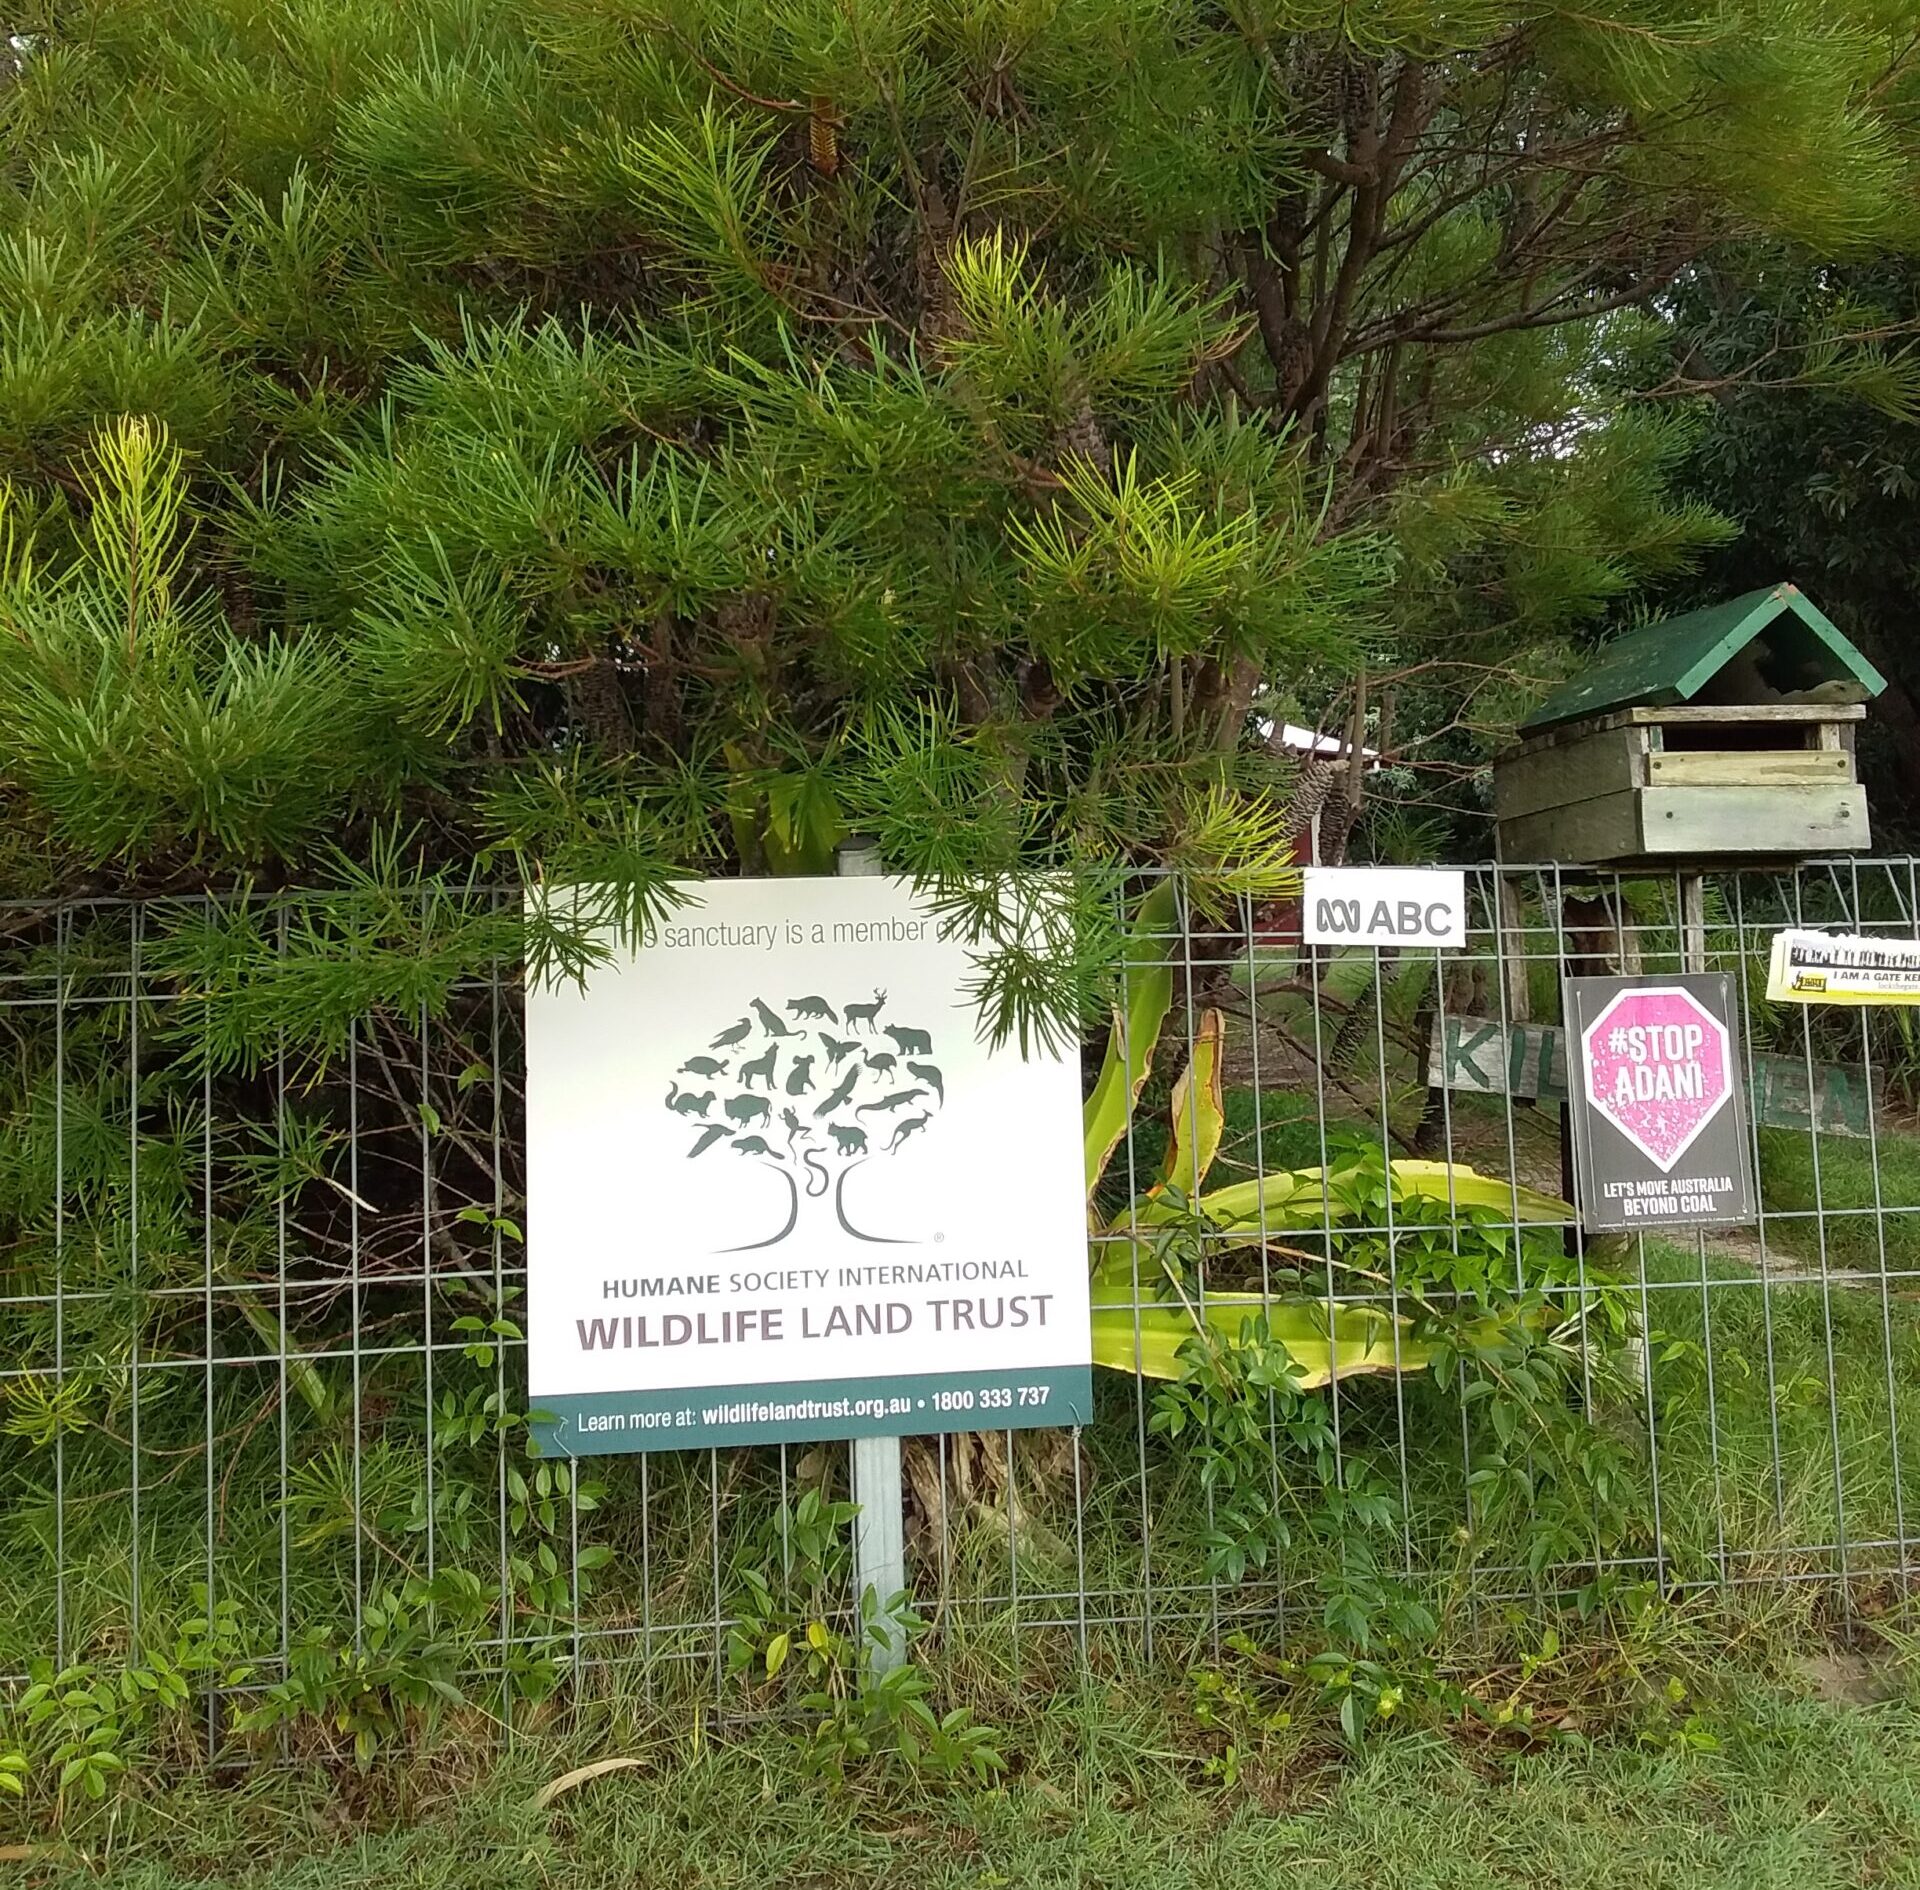 The “Land for Wildlife” sign on Harry Johnson’s small property amid a background of green plants.